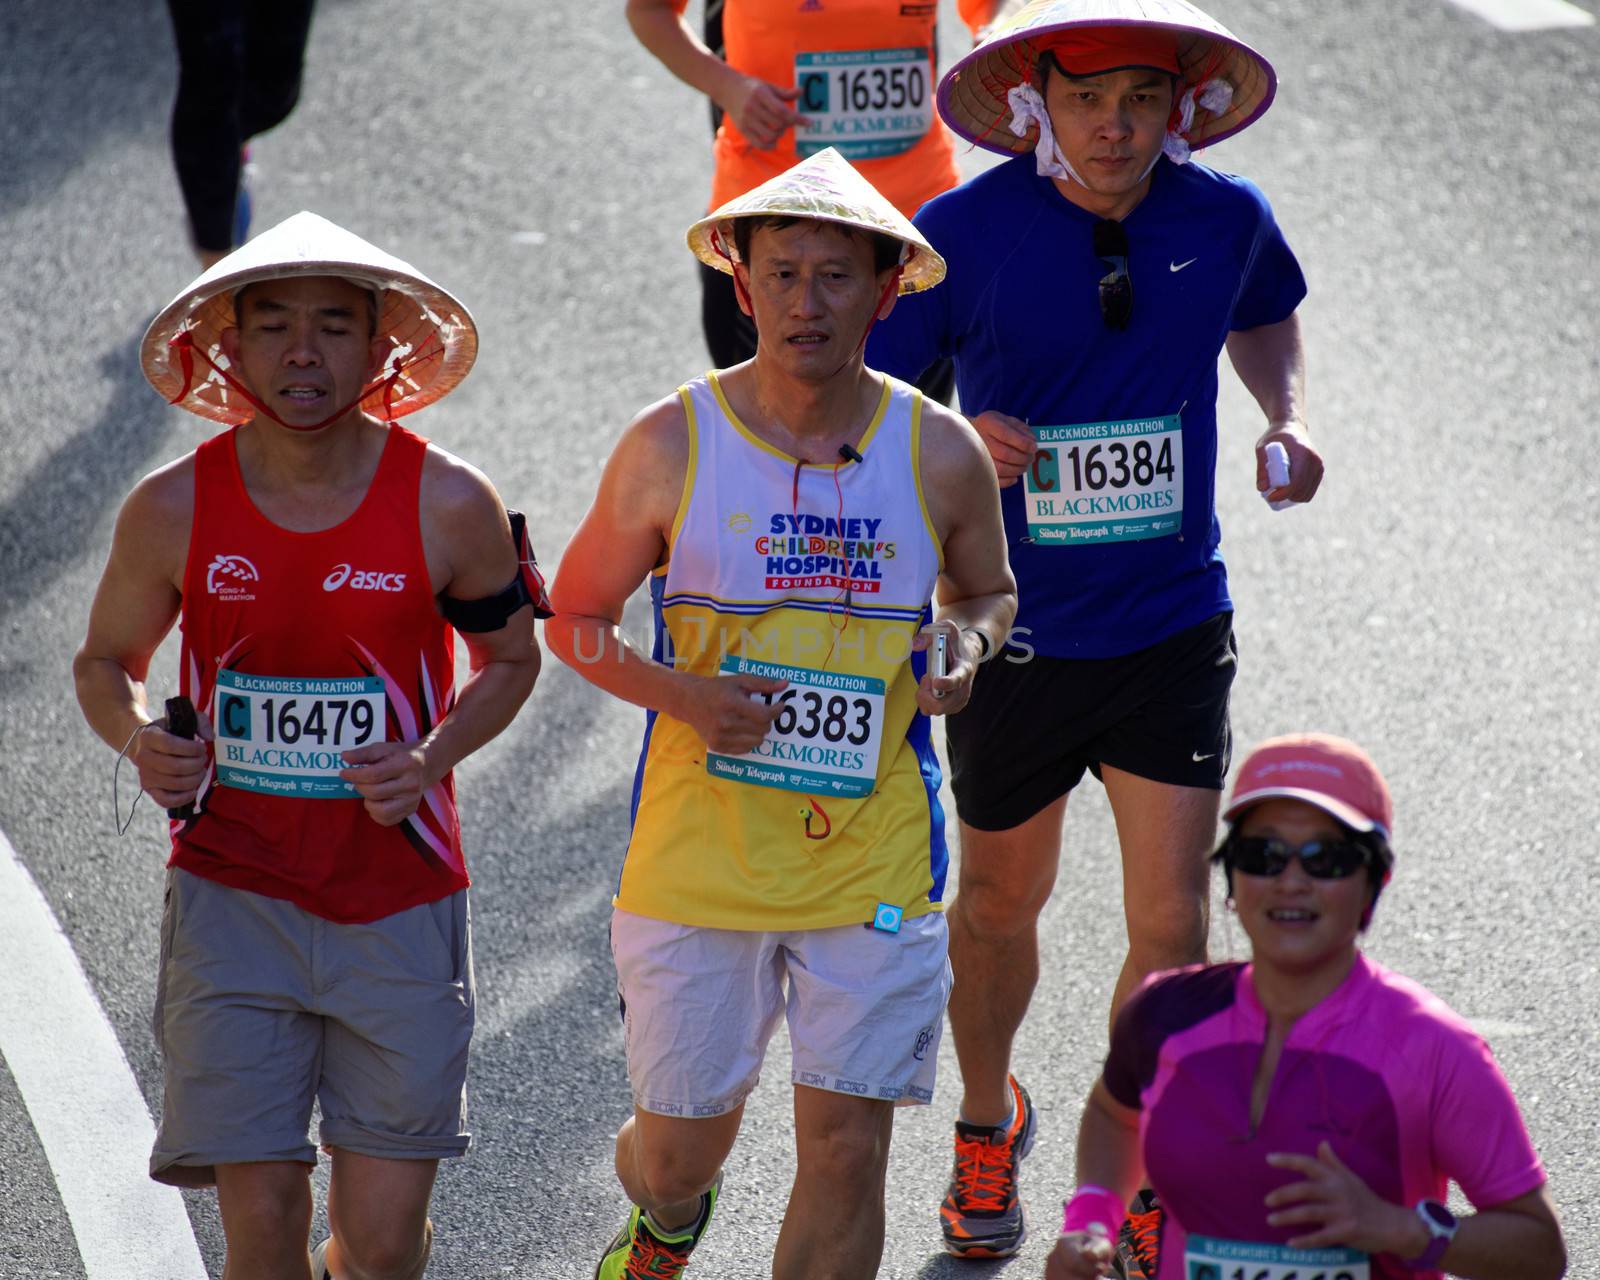 AUSTRALIA, Sydney: Participants wearing Asian conical hats compete in the Sydney Running Festival on September 20, 2015. Around 30,000 participants took part in the 15th Sydney Running Festival which incorporates a 42km marathon, a half marathon, a 9km bridge run as well as a 3.5km family fun run